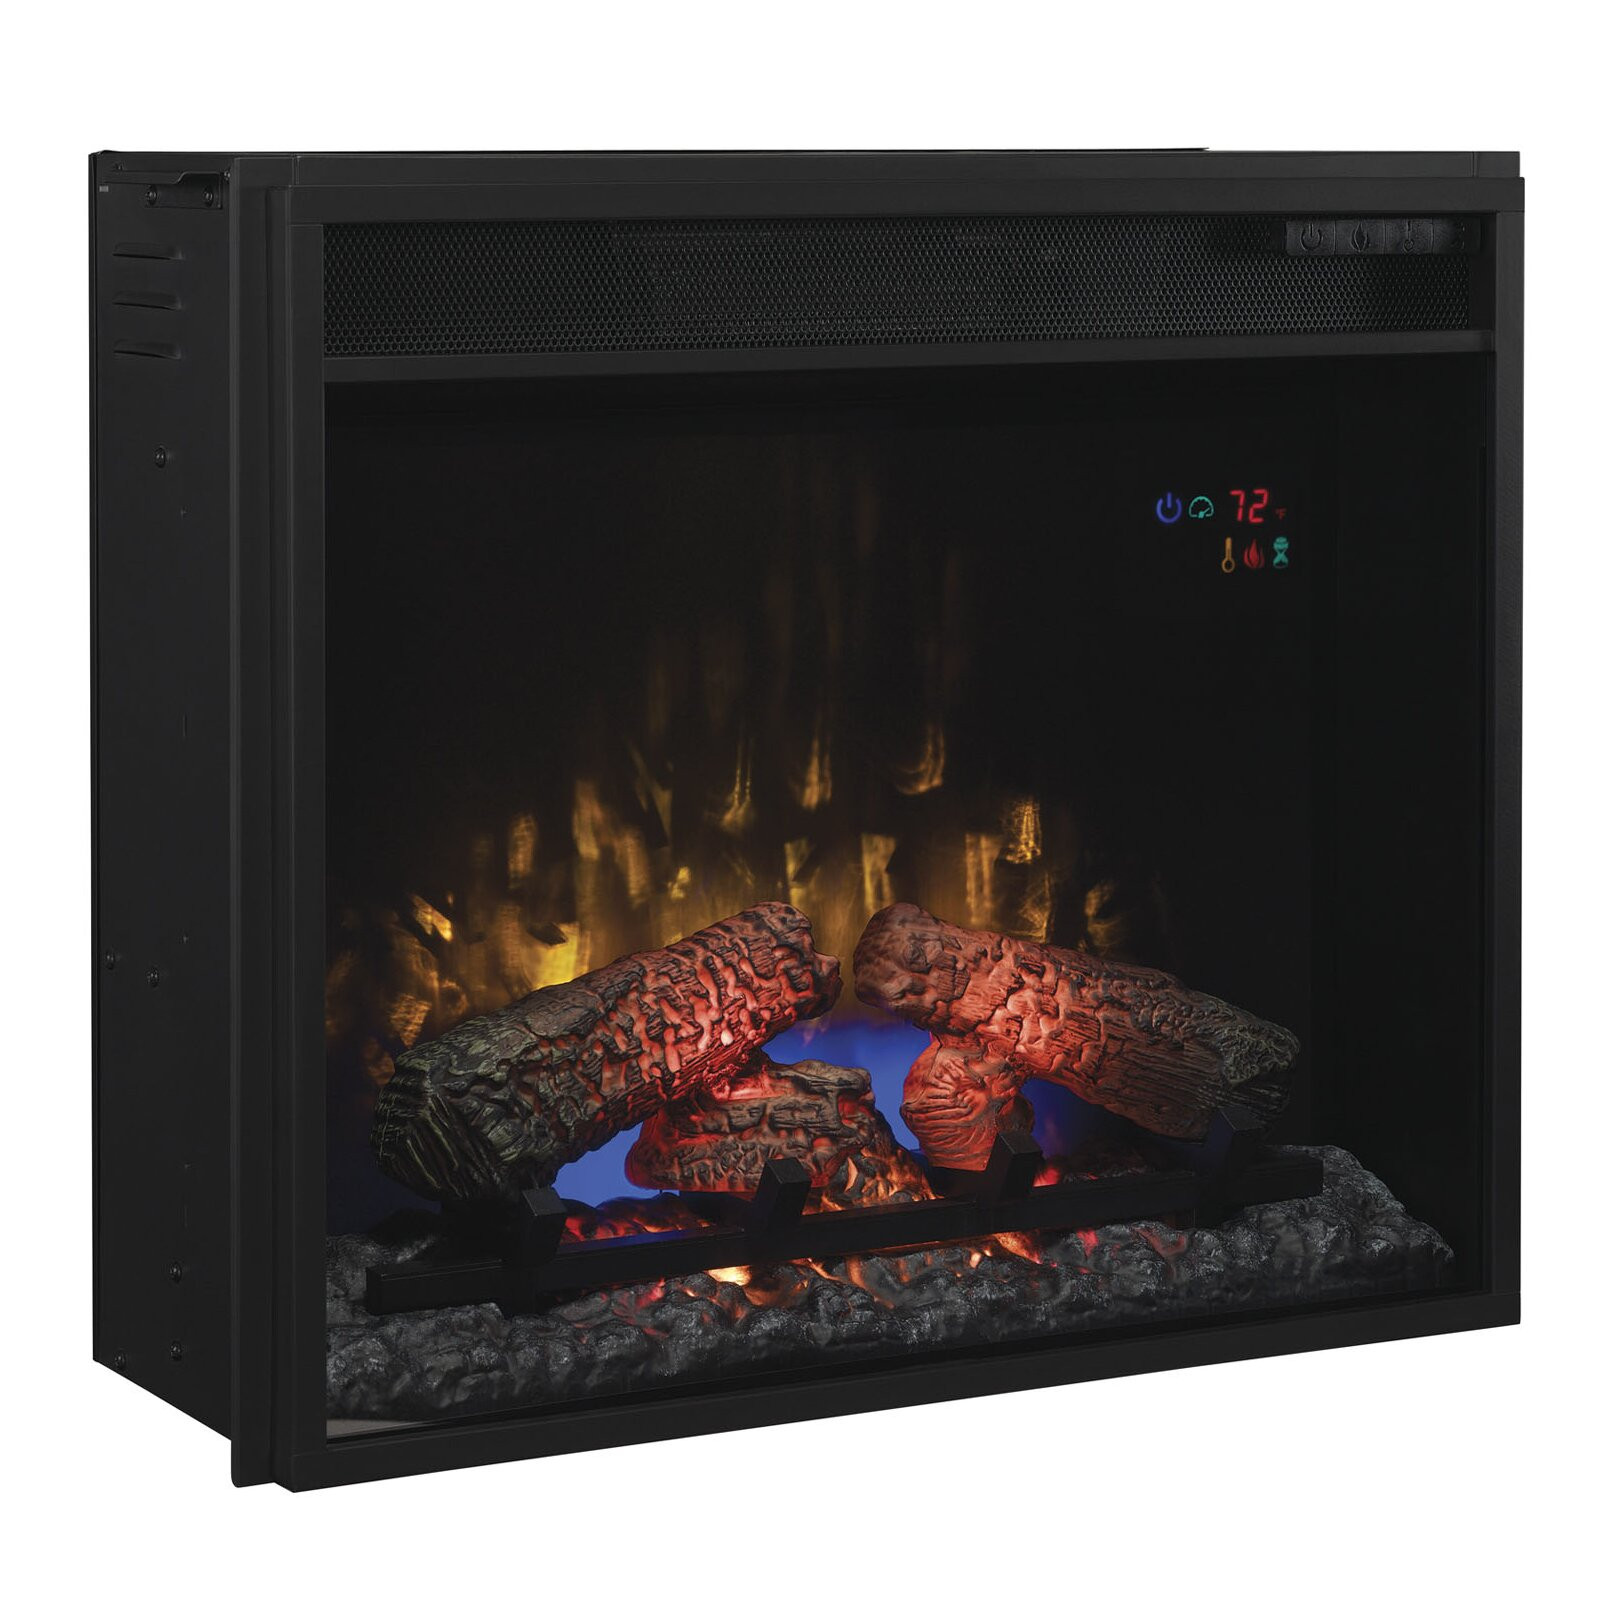 Classic Flame Electric Fireplace Insert
 Classic Flame Electric Fireplace Insert & Reviews